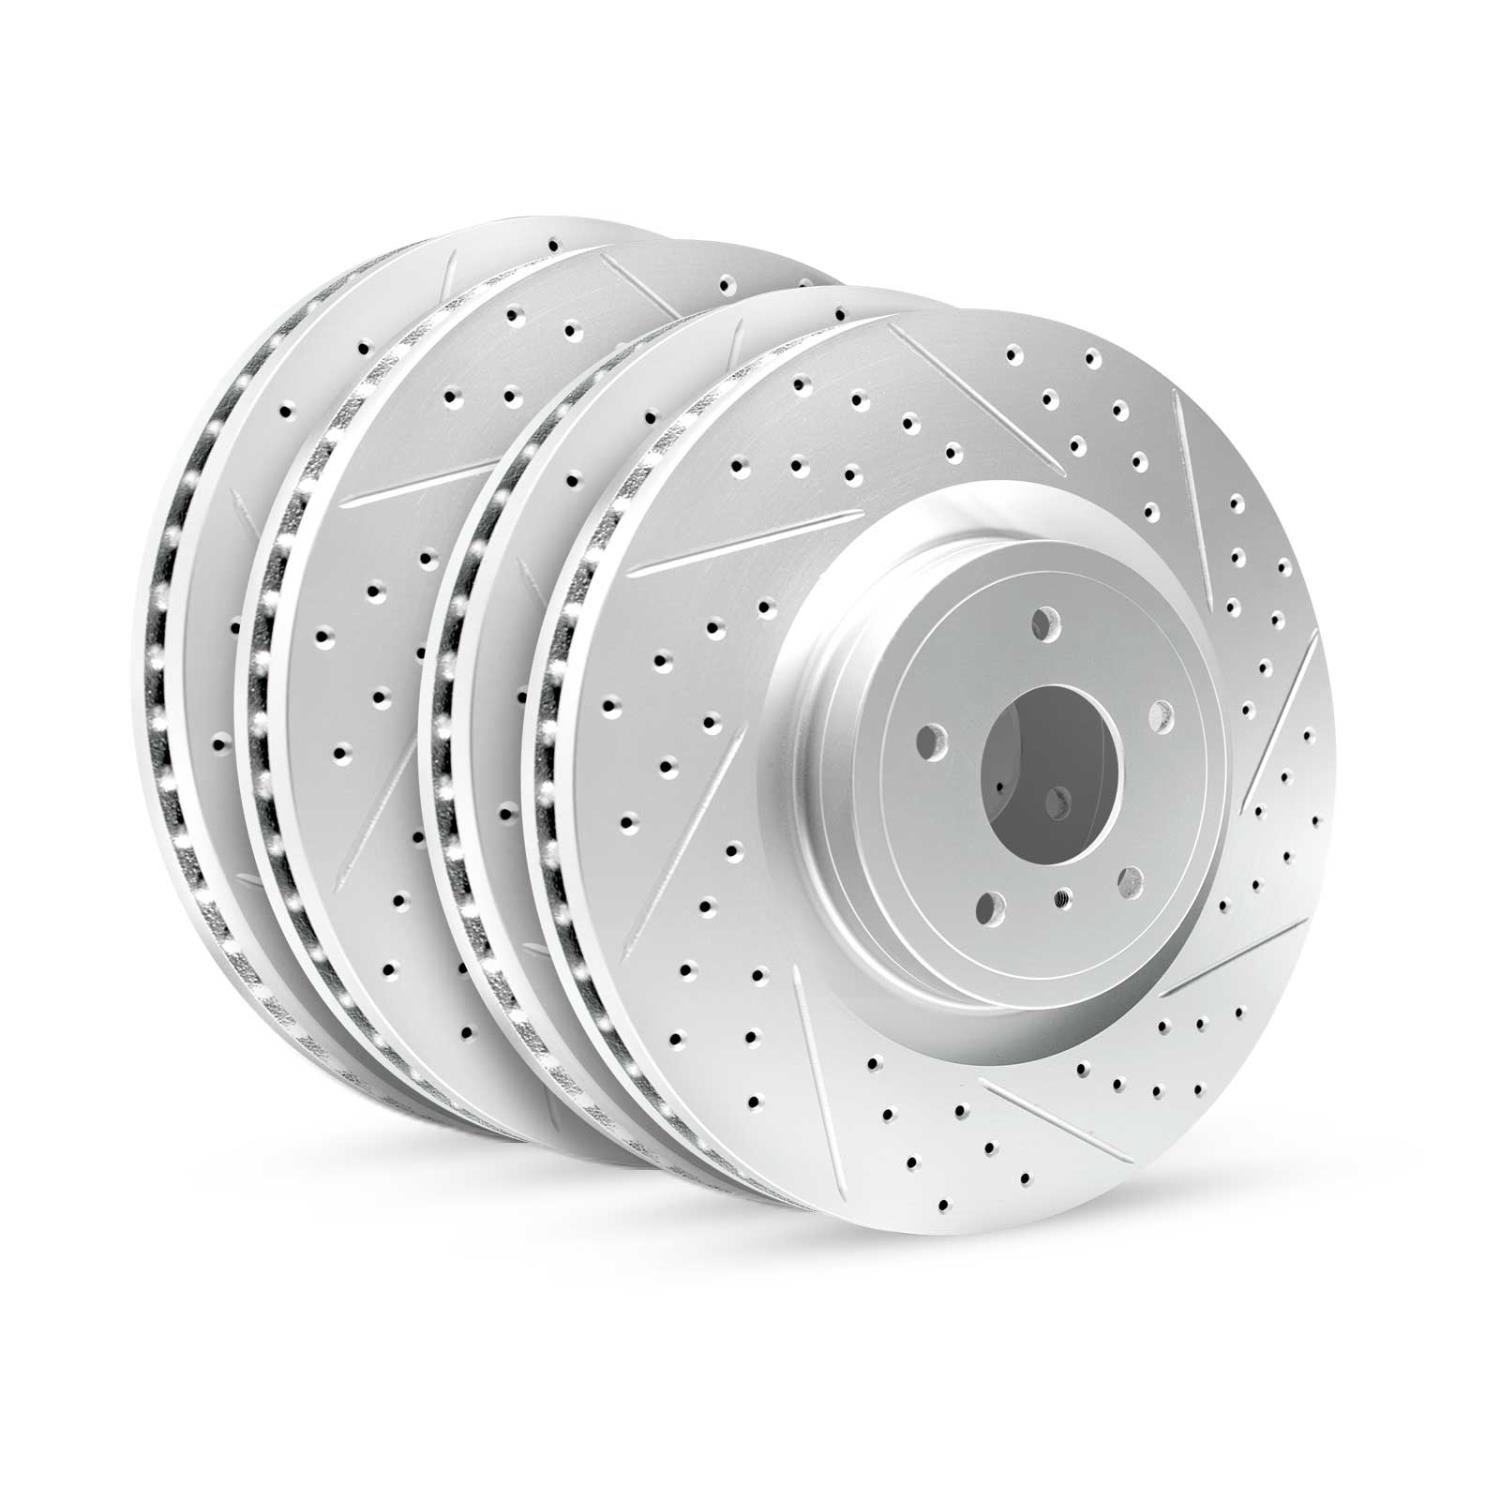 GEO-Carbon Drilled/Slotted Rotors, 1999-2002 Audi/Porsche/Volkswagen, Position: Front/Rear